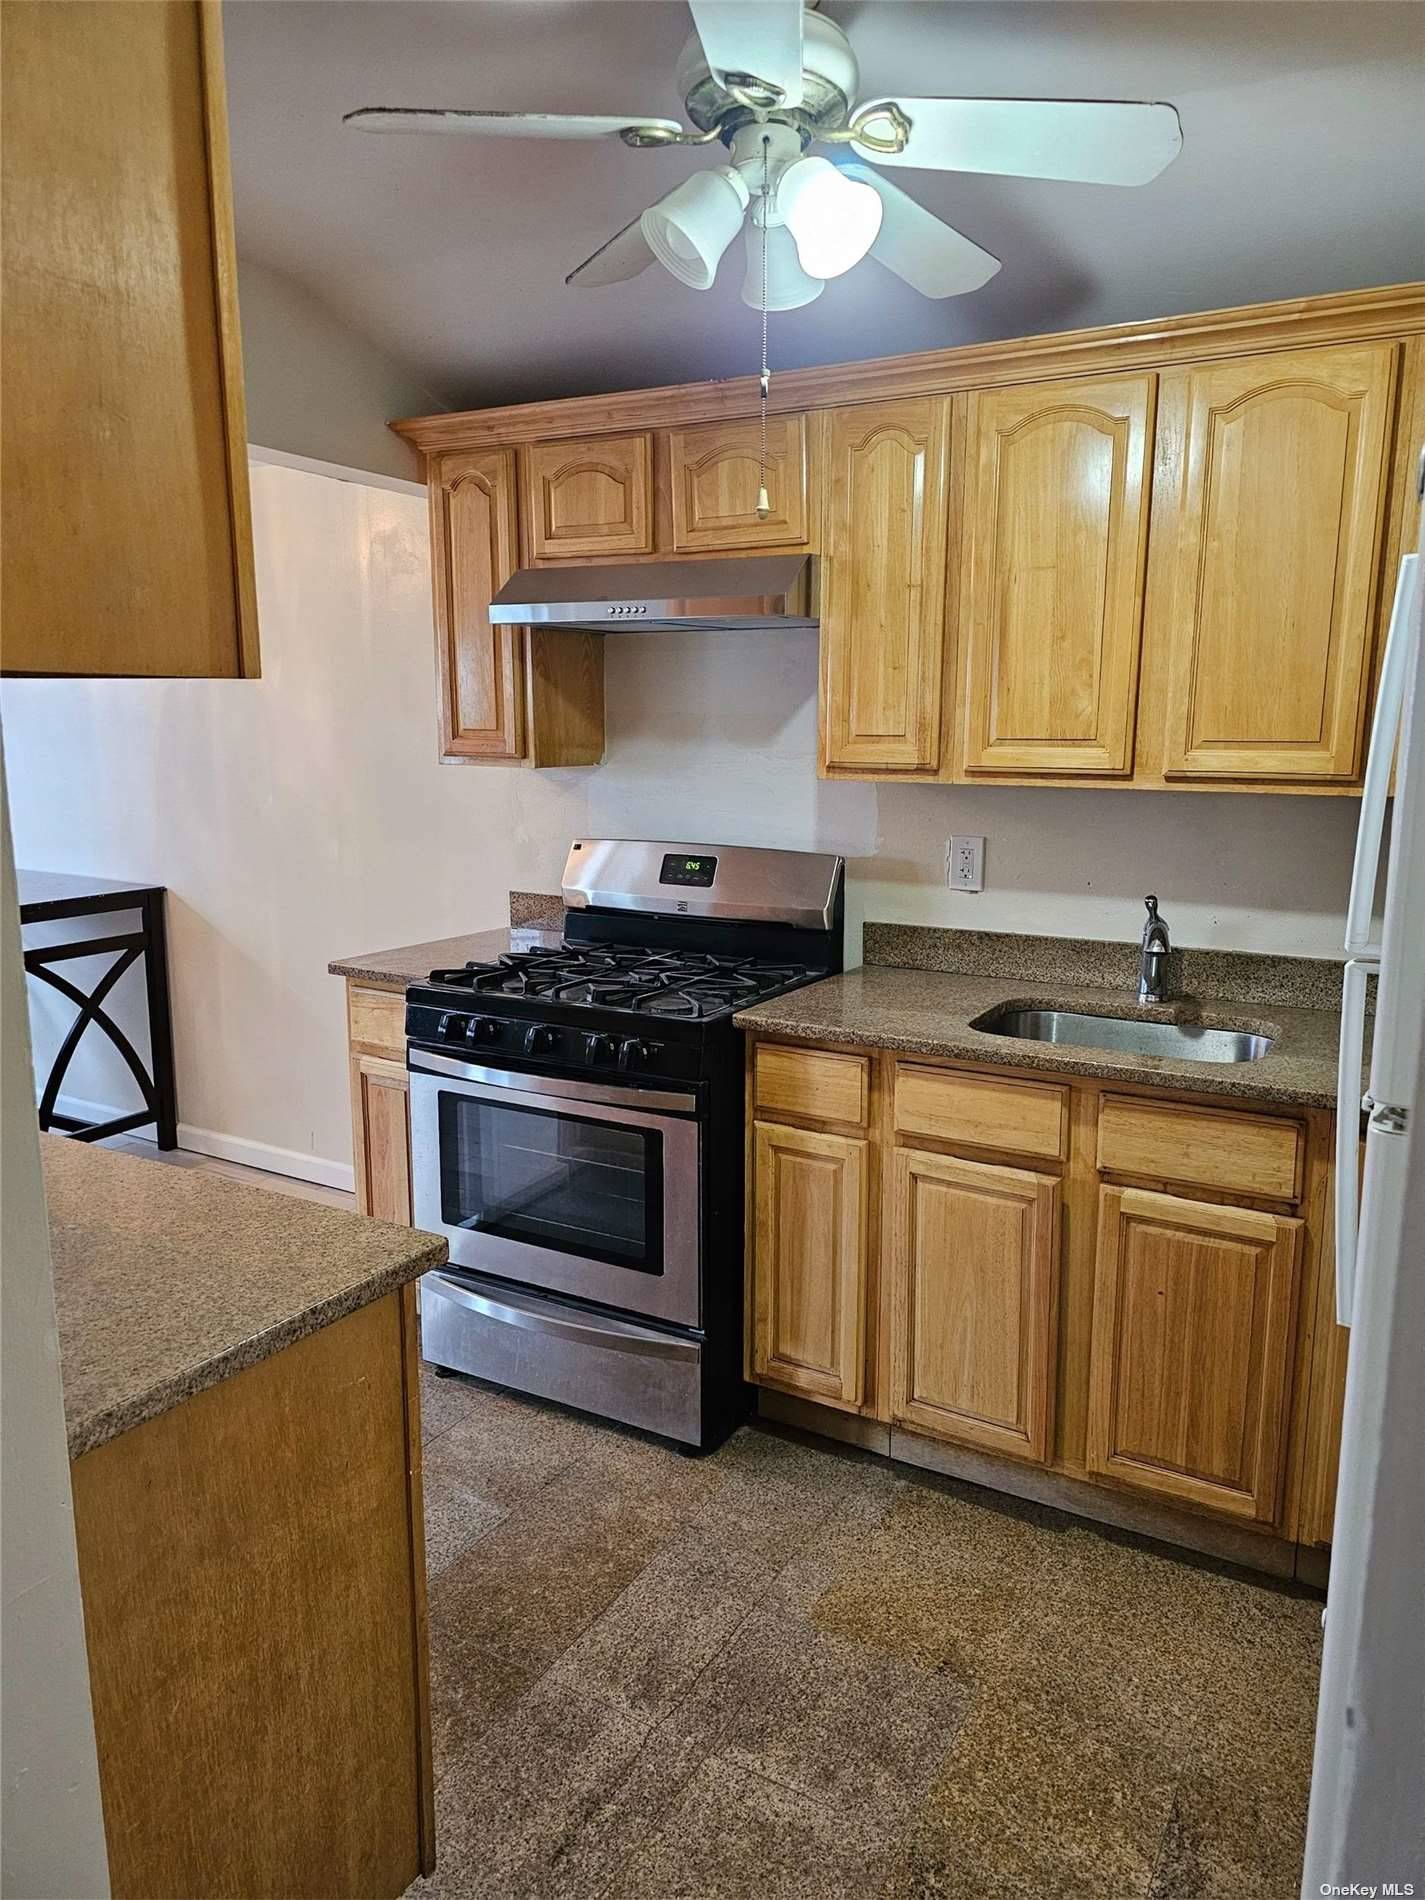 a kitchen with cabinets appliances and a window